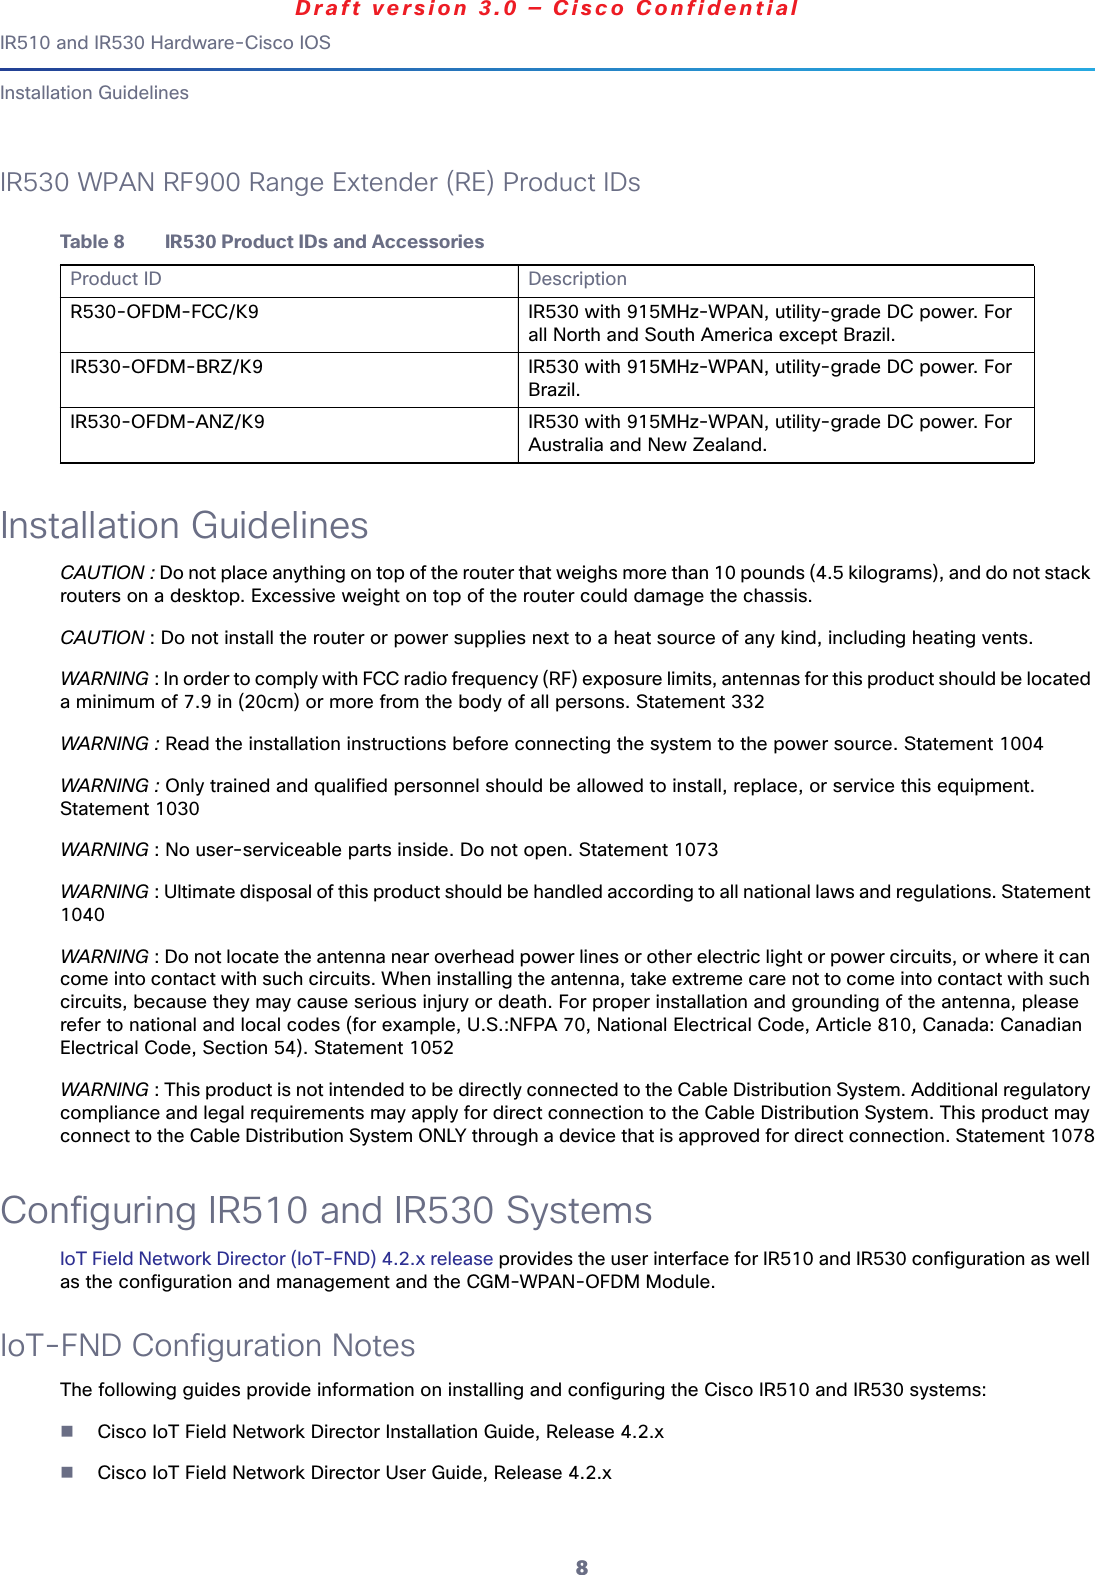 8IR510 and IR530 Hardware-Cisco IOSDraft version 3.0 — Cisco ConfidentialInstallation GuidelinesIR530 WPAN RF900 Range Extender (RE) Product IDsInstallation GuidelinesCAUTION : Do not place anything on top of the router that weighs more than 10 pounds (4.5 kilograms), and do not stack routers on a desktop. Excessive weight on top of the router could damage the chassis.CAUTION : Do not install the router or power supplies next to a heat source of any kind, including heating vents.WARNING : In order to comply with FCC radio frequency (RF) exposure limits, antennas for this product should be located a minimum of 7.9 in (20cm) or more from the body of all persons. Statement 332WARNING : Read the installation instructions before connecting the system to the power source. Statement 1004WARNING : Only trained and qualified personnel should be allowed to install, replace, or service this equipment. Statement 1030WARNING : No user-serviceable parts inside. Do not open. Statement 1073WARNING : Ultimate disposal of this product should be handled according to all national laws and regulations. Statement 1040WARNING : Do not locate the antenna near overhead power lines or other electric light or power circuits, or where it can come into contact with such circuits. When installing the antenna, take extreme care not to come into contact with such circuits, because they may cause serious injury or death. For proper installation and grounding of the antenna, please refer to national and local codes (for example, U.S.:NFPA 70, National Electrical Code, Article 810, Canada: Canadian Electrical Code, Section 54). Statement 1052WARNING : This product is not intended to be directly connected to the Cable Distribution System. Additional regulatory compliance and legal requirements may apply for direct connection to the Cable Distribution System. This product may connect to the Cable Distribution System ONLY through a device that is approved for direct connection. Statement 1078Configuring IR510 and IR530 SystemsIoT Field Network Director (IoT-FND) 4.2.x release provides the user interface for IR510 and IR530 configuration as well as the configuration and management and the CGM-WPAN-OFDM Module.IoT-FND Configuration NotesThe following guides provide information on installing and configuring the Cisco IR510 and IR530 systems:Cisco IoT Field Network Director Installation Guide, Release 4.2.xCisco IoT Field Network Director User Guide, Release 4.2.xTable 8 IR530 Product IDs and AccessoriesProduct ID DescriptionR530-OFDM-FCC/K9 IR530 with 915MHz-WPAN, utility-grade DC power. For all North and South America except Brazil.IR530-OFDM-BRZ/K9 IR530 with 915MHz-WPAN, utility-grade DC power. For Brazil.IR530-OFDM-ANZ/K9 IR530 with 915MHz-WPAN, utility-grade DC power. For Australia and New Zealand.